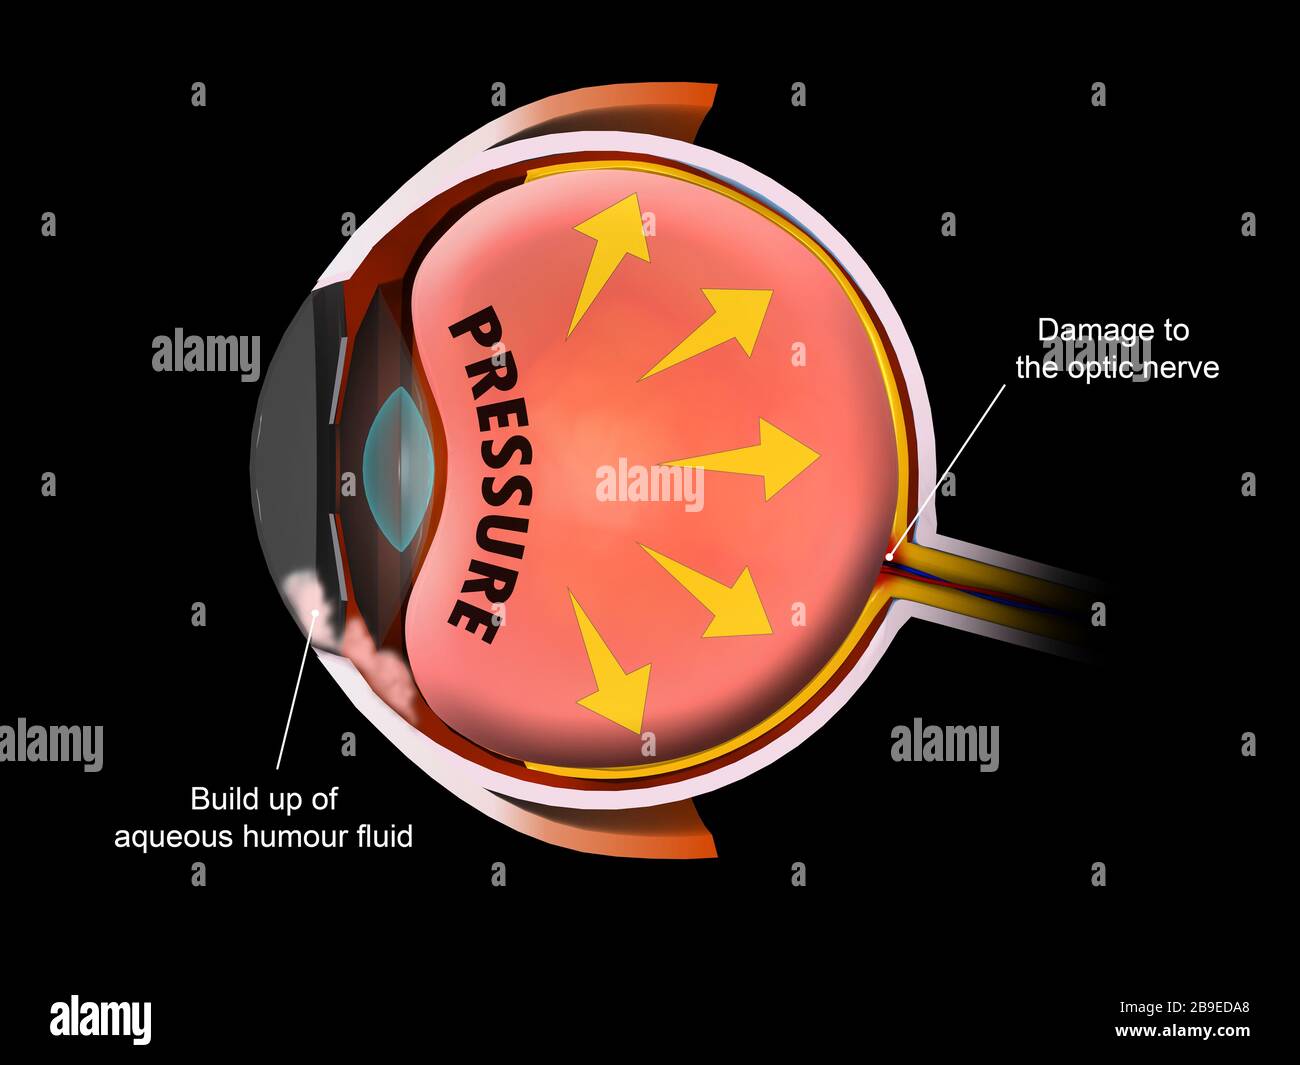 Medical illustration showing increased pressure in the eyeball, leading to glaucoma. Stock Photo